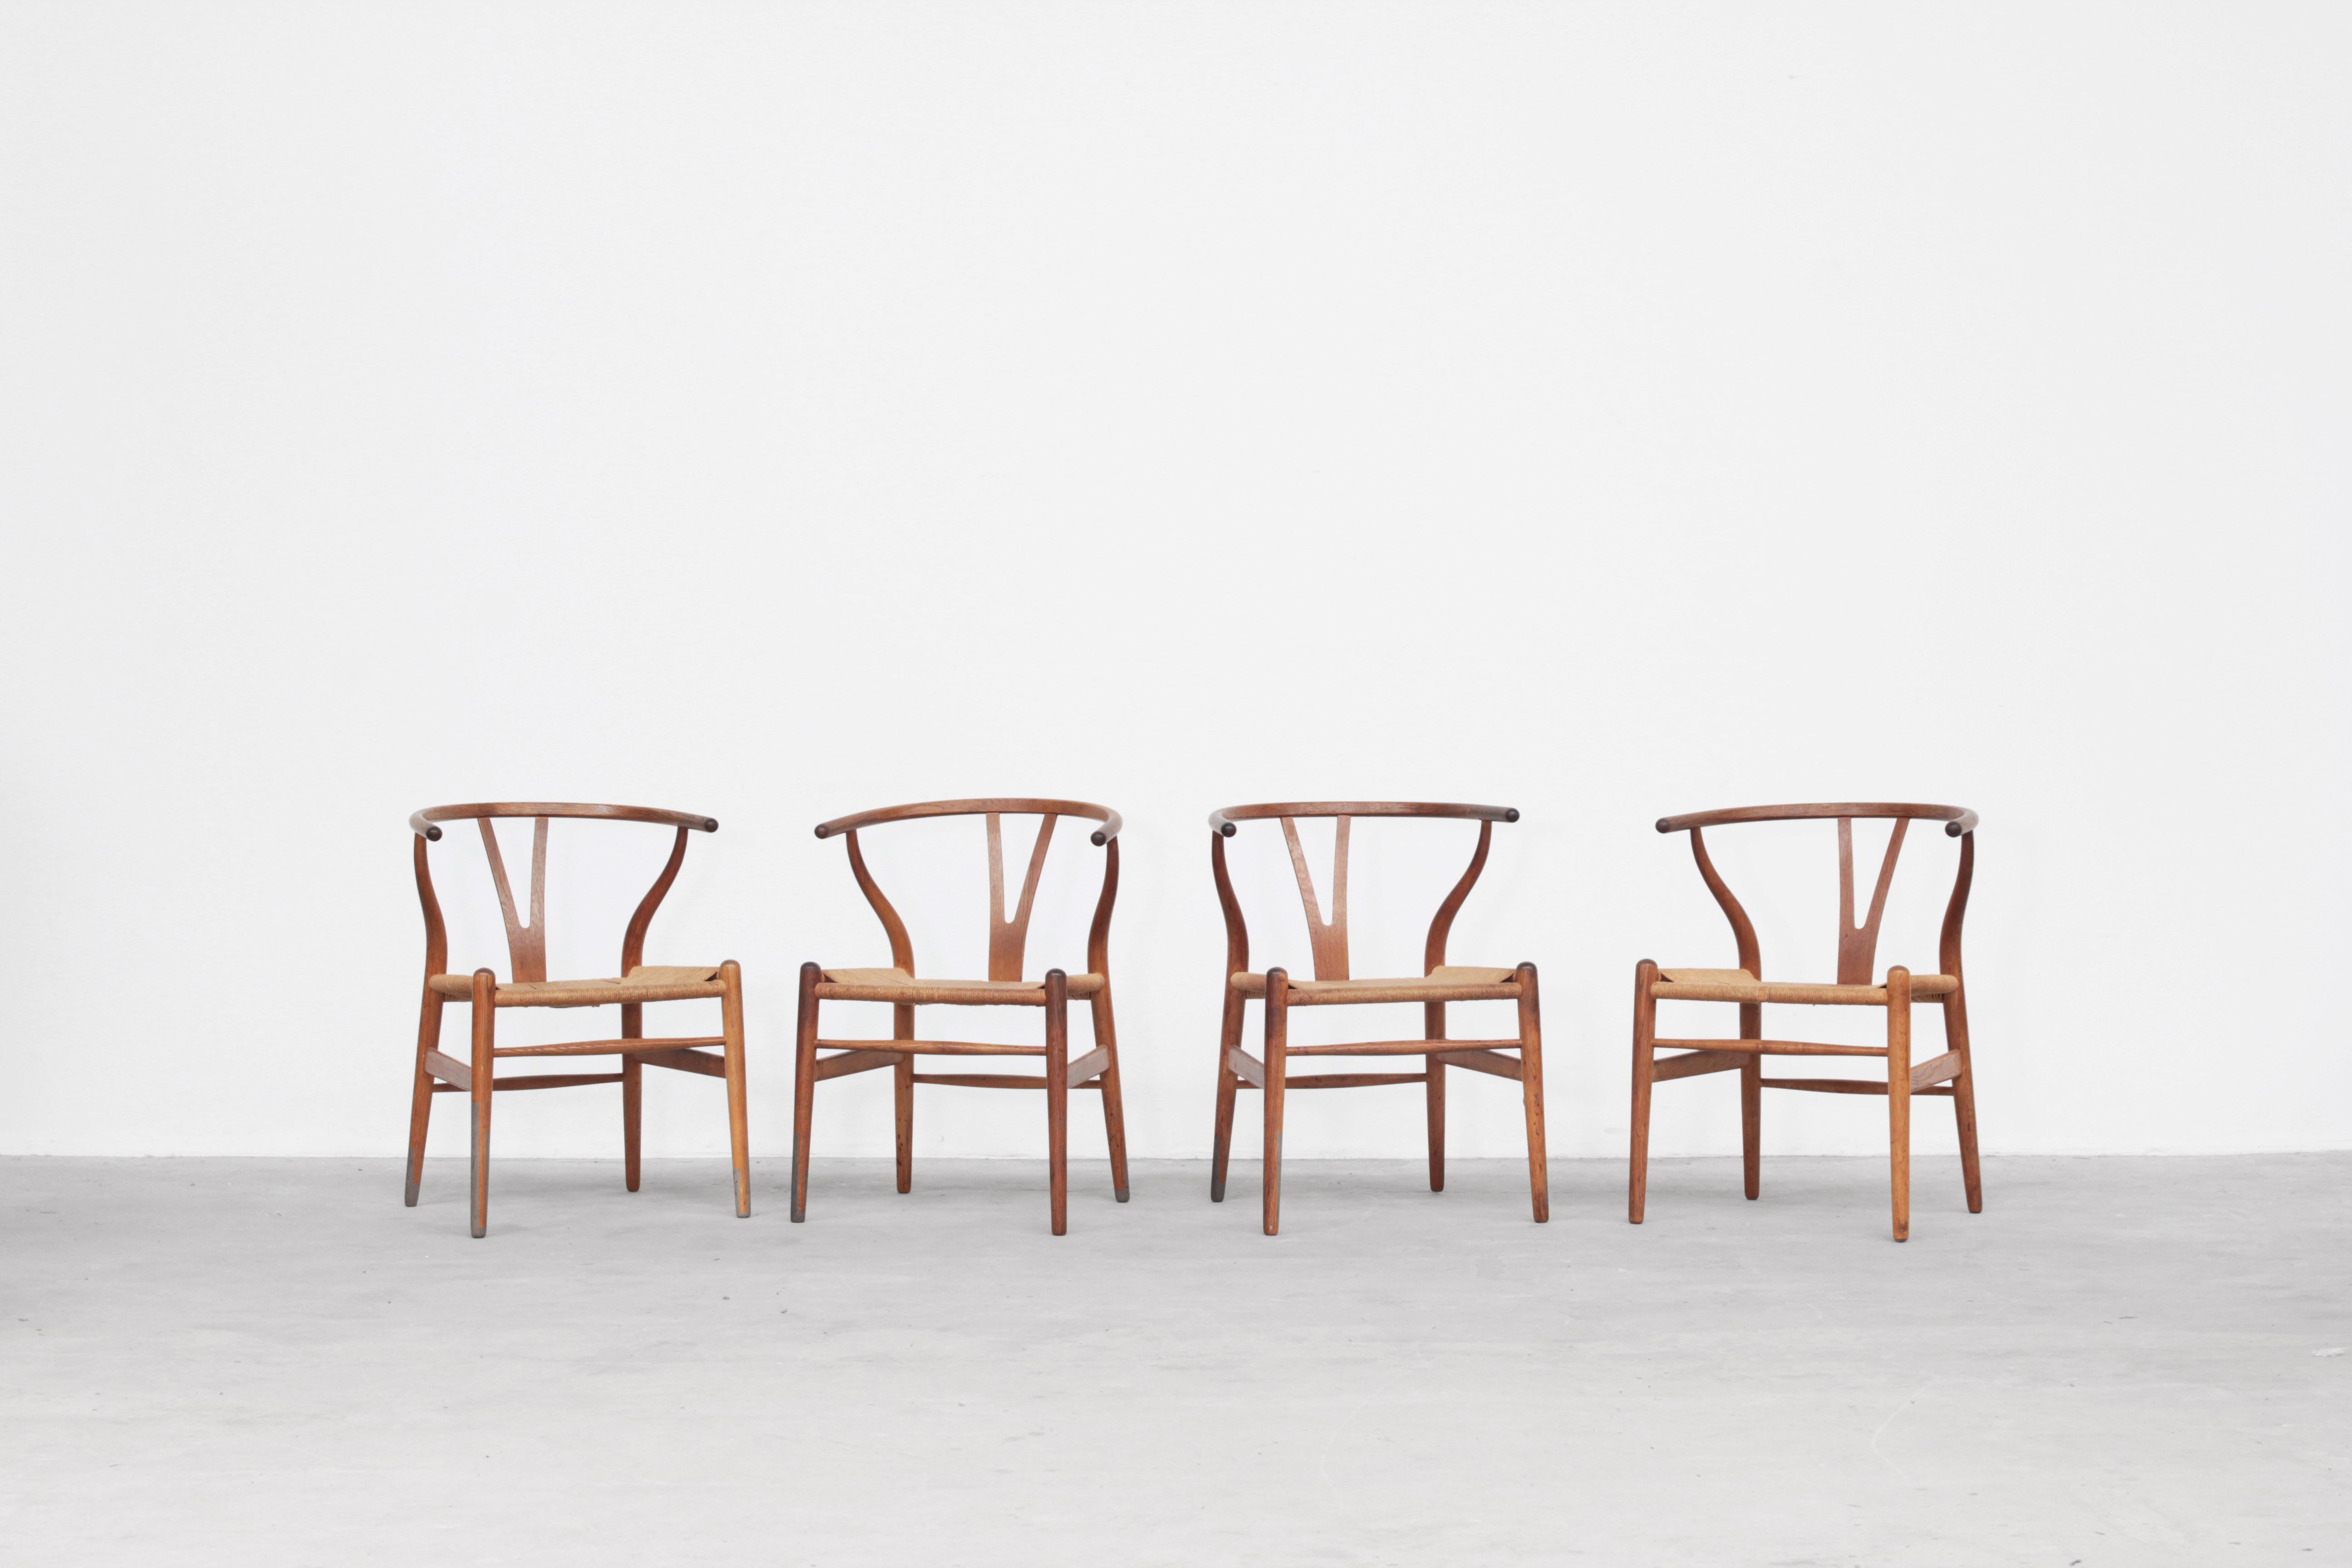 A set of four beautiful and original wishbone chairs designed by Hans J. Wegner and produced by Carl Hansen in the 1960s in Denmark. All chairs are made out of oak and in original condition with signs of usage.

We have six more of this model in